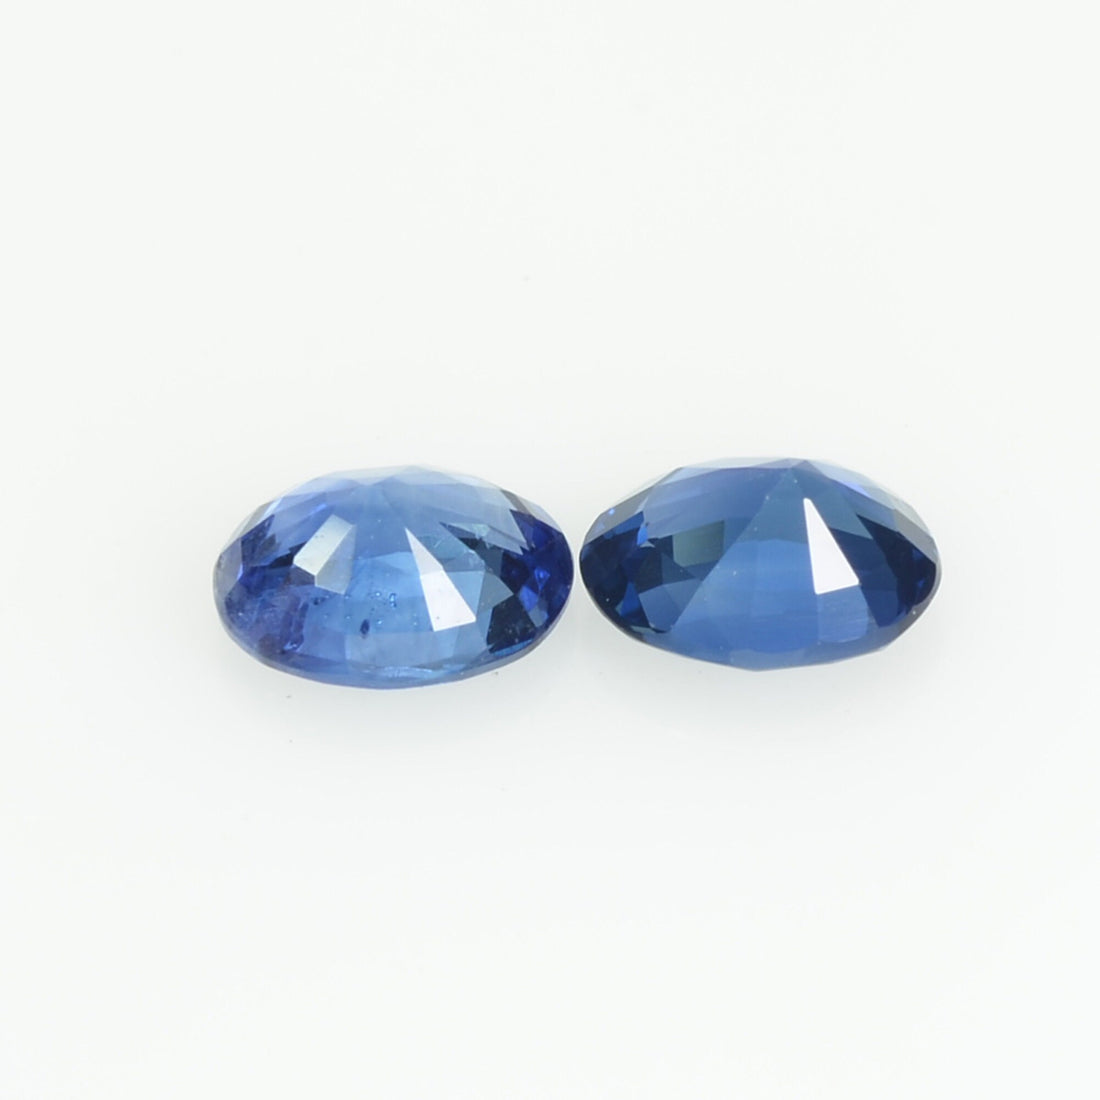 0.78 cts Natural Blue Sapphire Loose Pair Gemstone Oval Cut